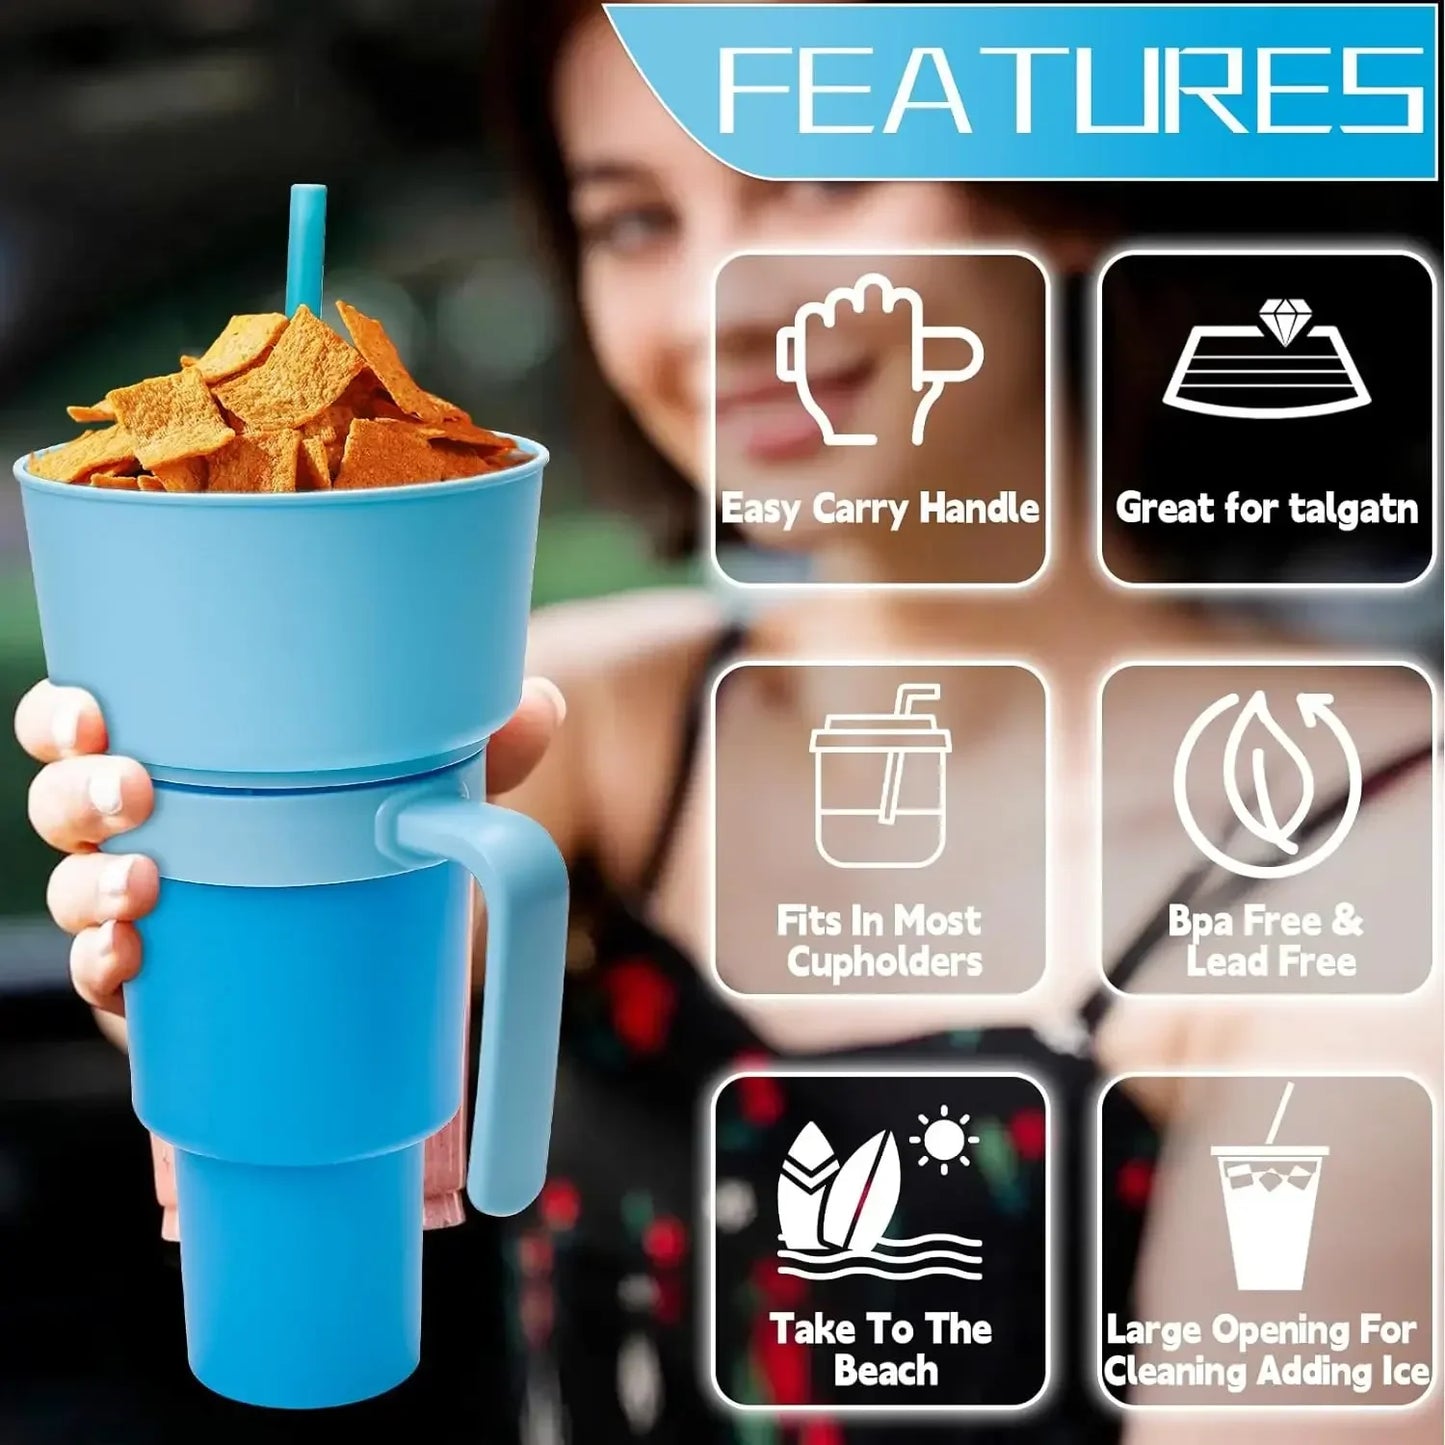 2In1 Snack Bowl Drink Cup with Straw Stadium Tumbler Water Bottle Straw Splash Proof Leakproof Portable Adults Kids Cinema Trip